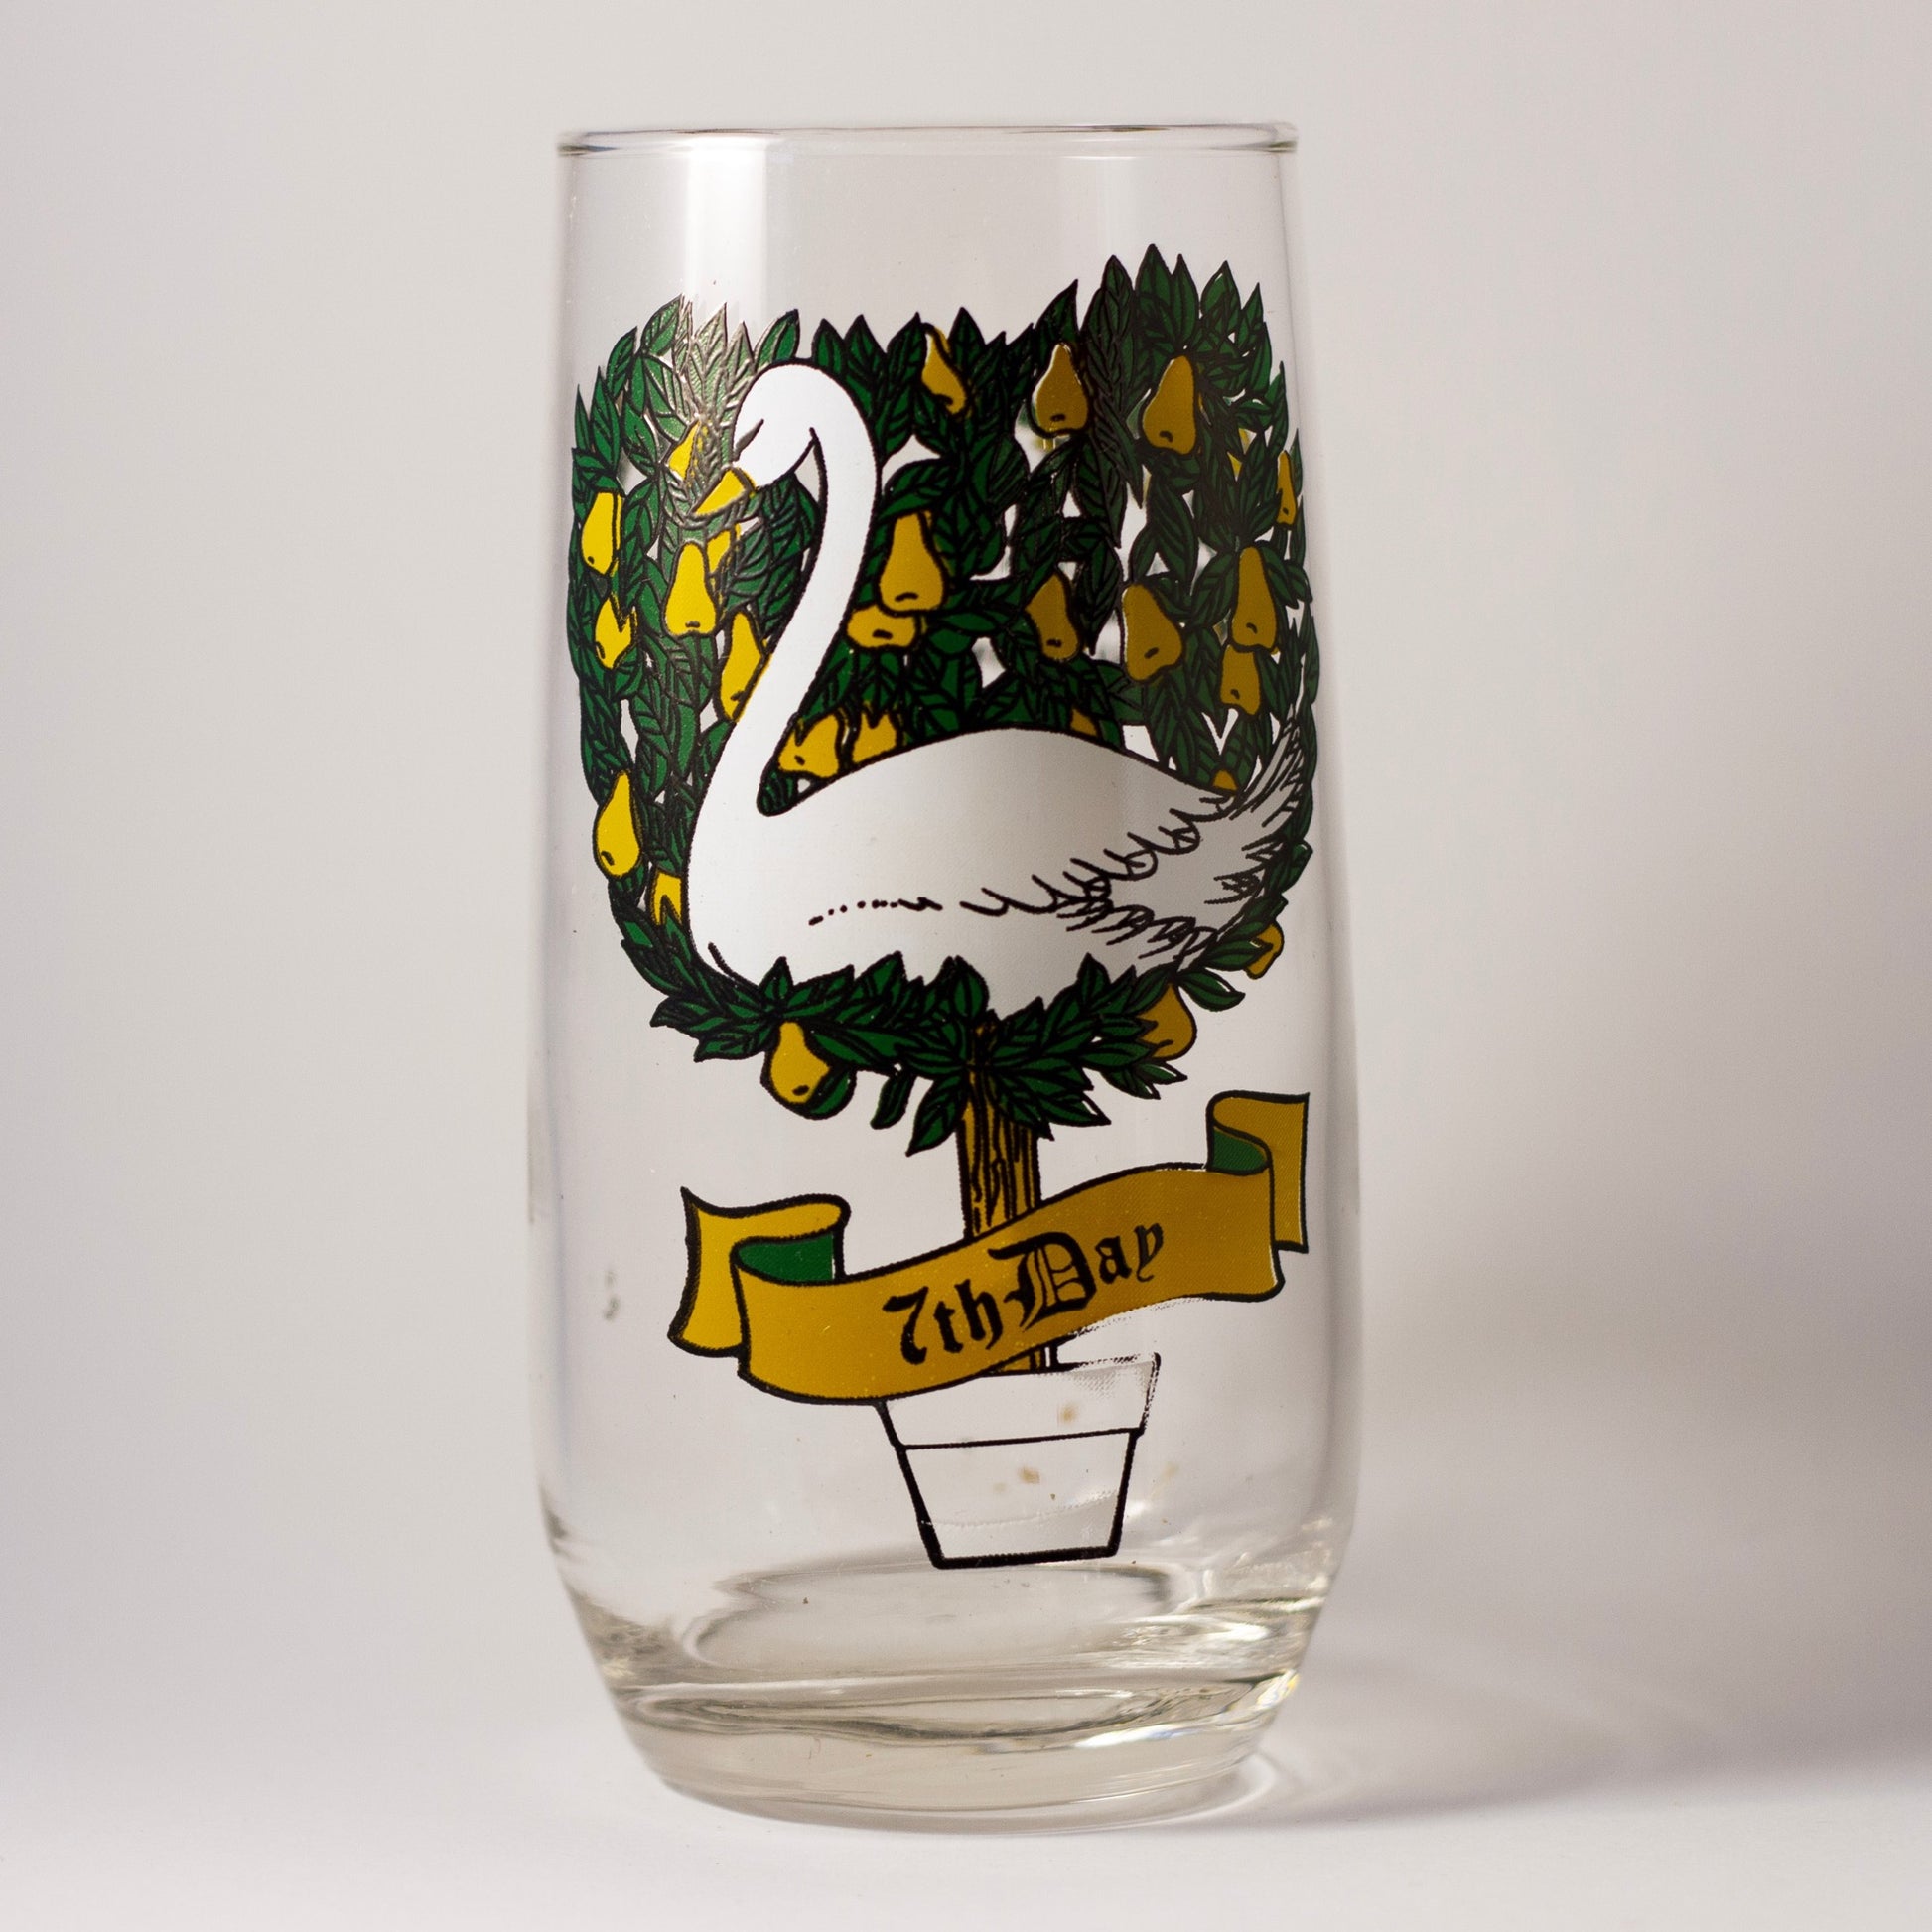 Whimsical 7th Day of the TWELVE DAYS OF CHRISTMAS Glass 